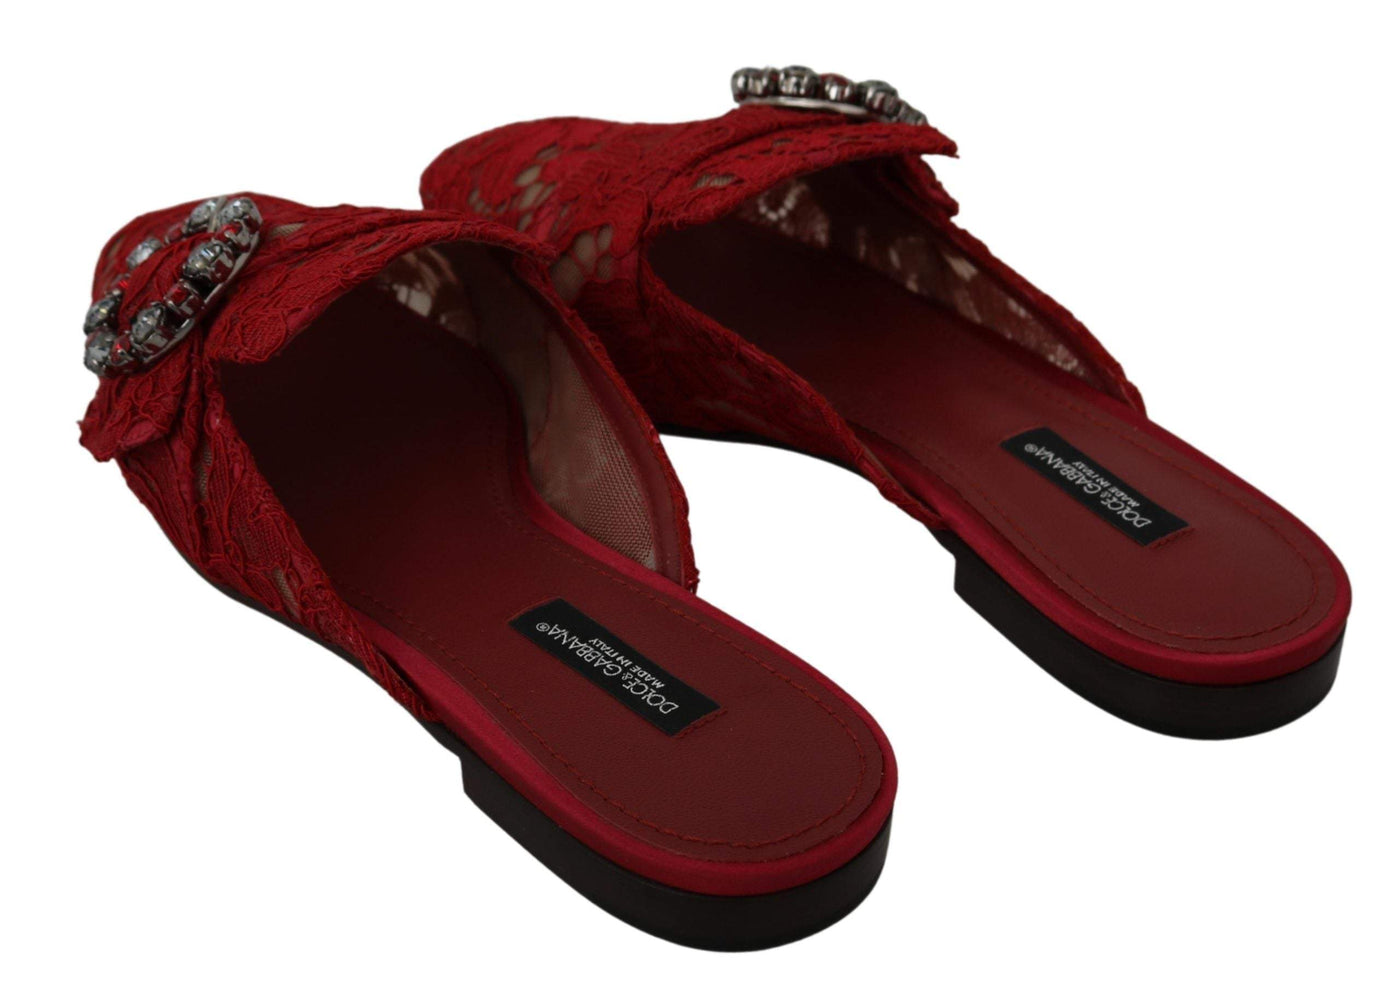 Dolce & Gabbana Red Lace Crystal Slide On Flats Shoes Dolce & Gabbana, EU35/US4.5, feed-agegroup-adult, feed-color-Red, feed-gender-female, Flat Shoes - Women - Shoes, Red, Shoes - New Arrivals at SEYMAYKA